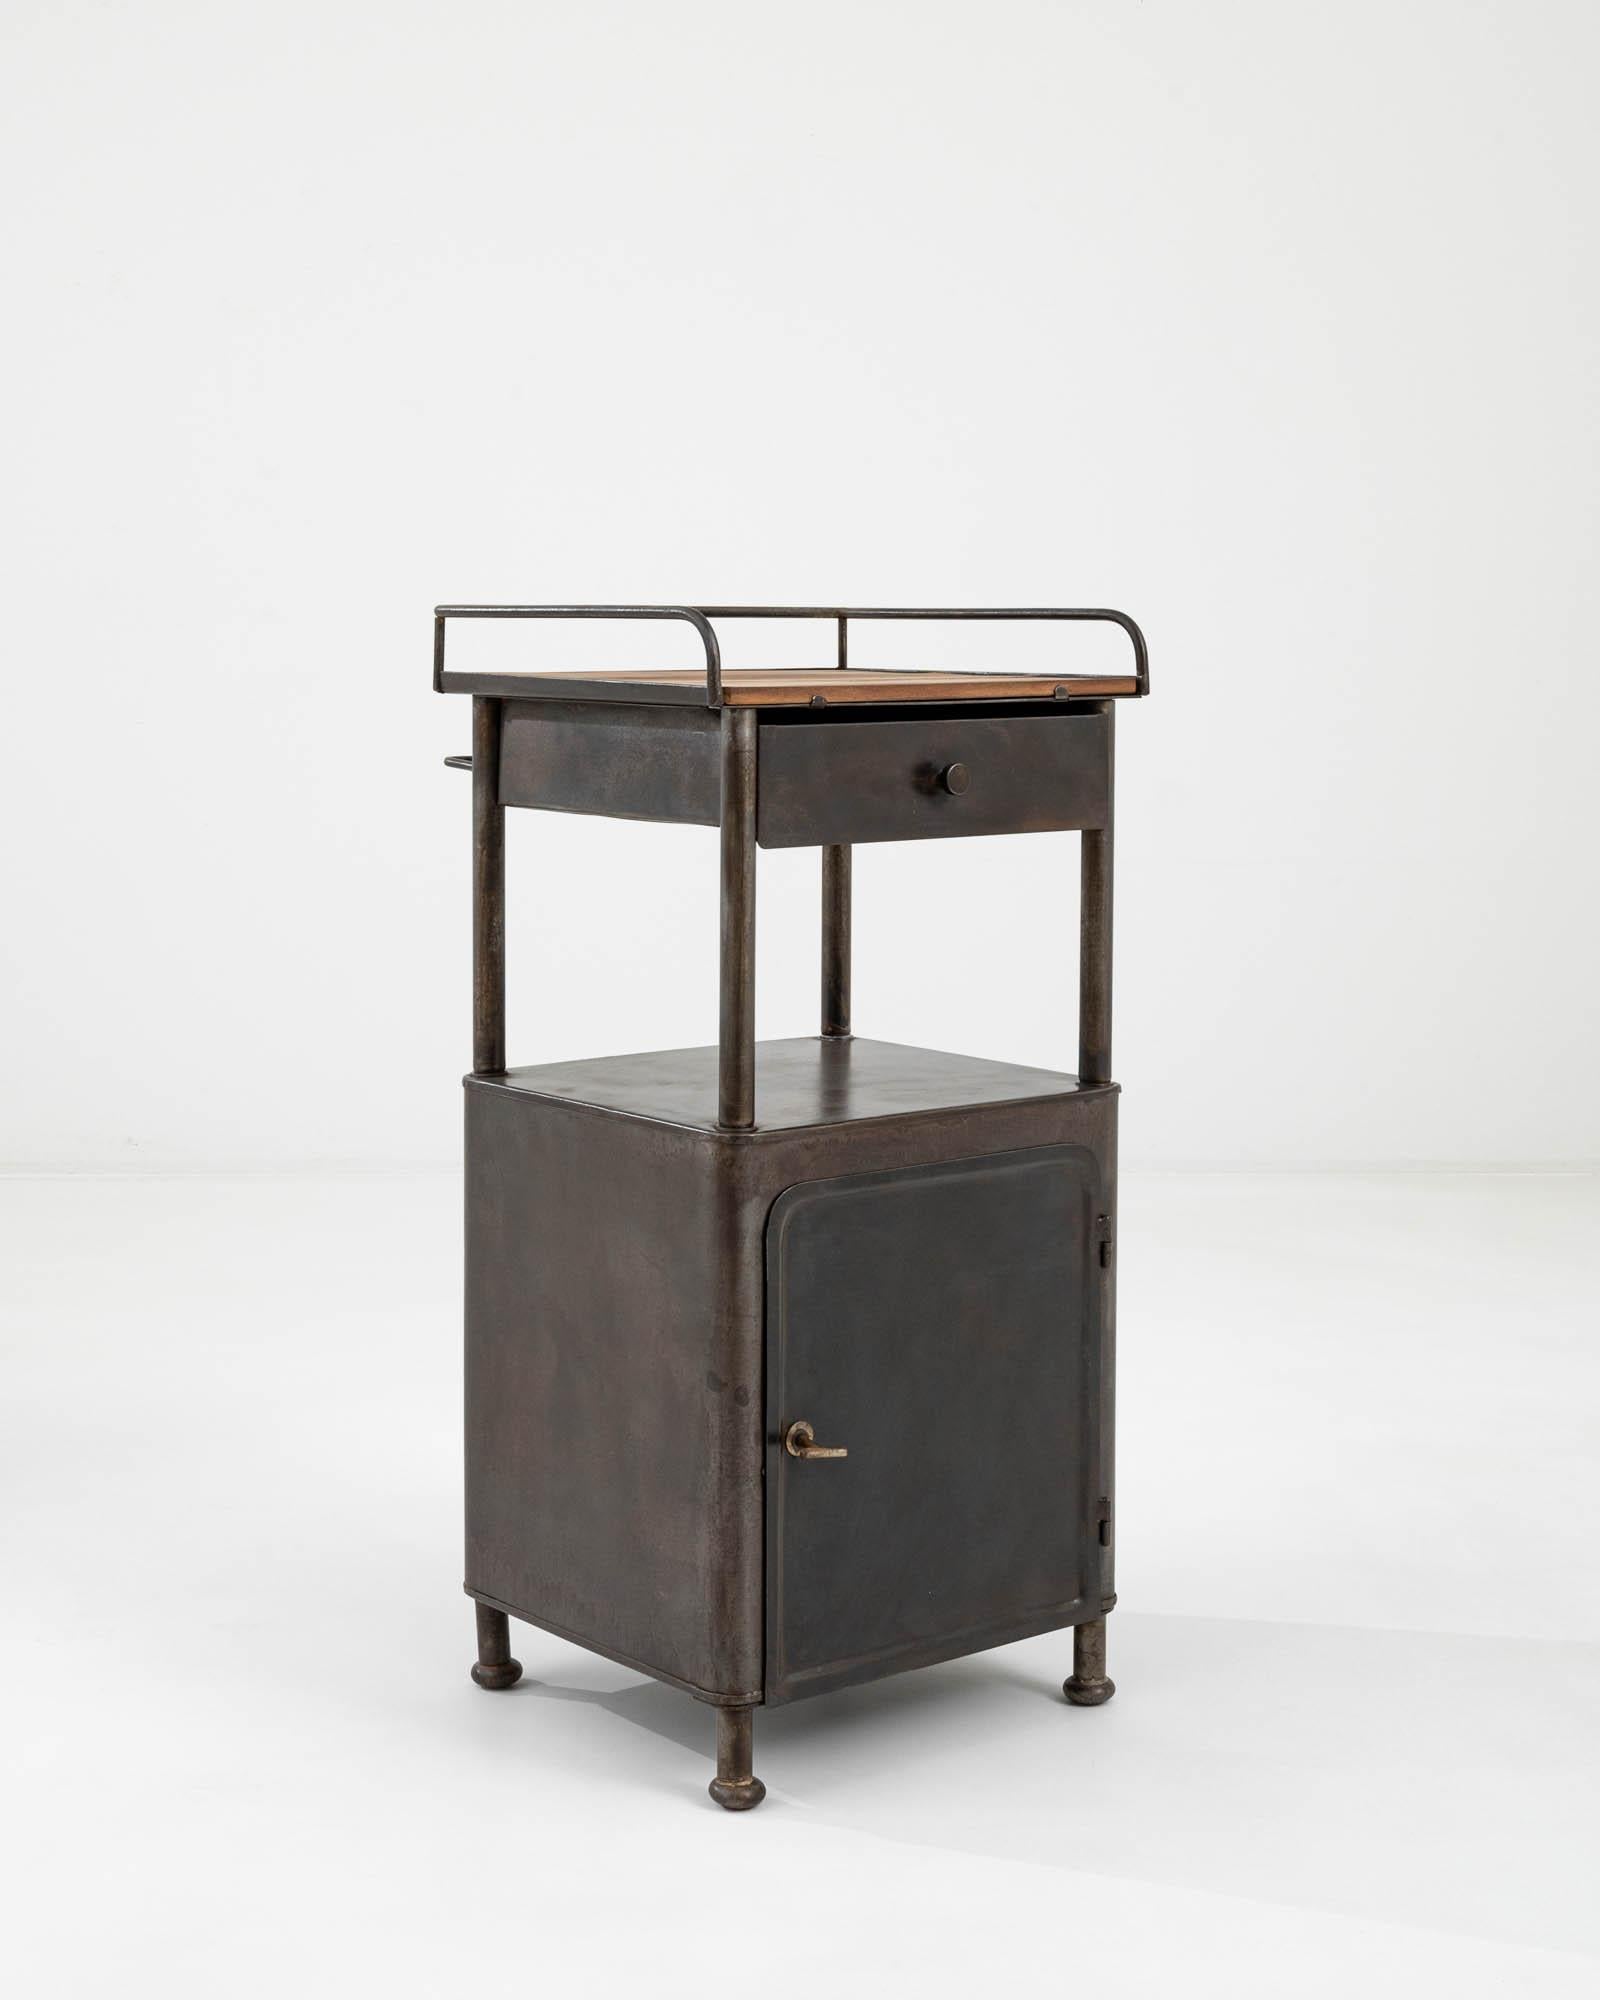 This metal side table was crafted in the Czech Republic circa 1950 – embodying the futurist spirit of industrialization. Elevated on tubular legs, the table features a convenient compartment with a door and a sliding drawer with a wood tablet on the